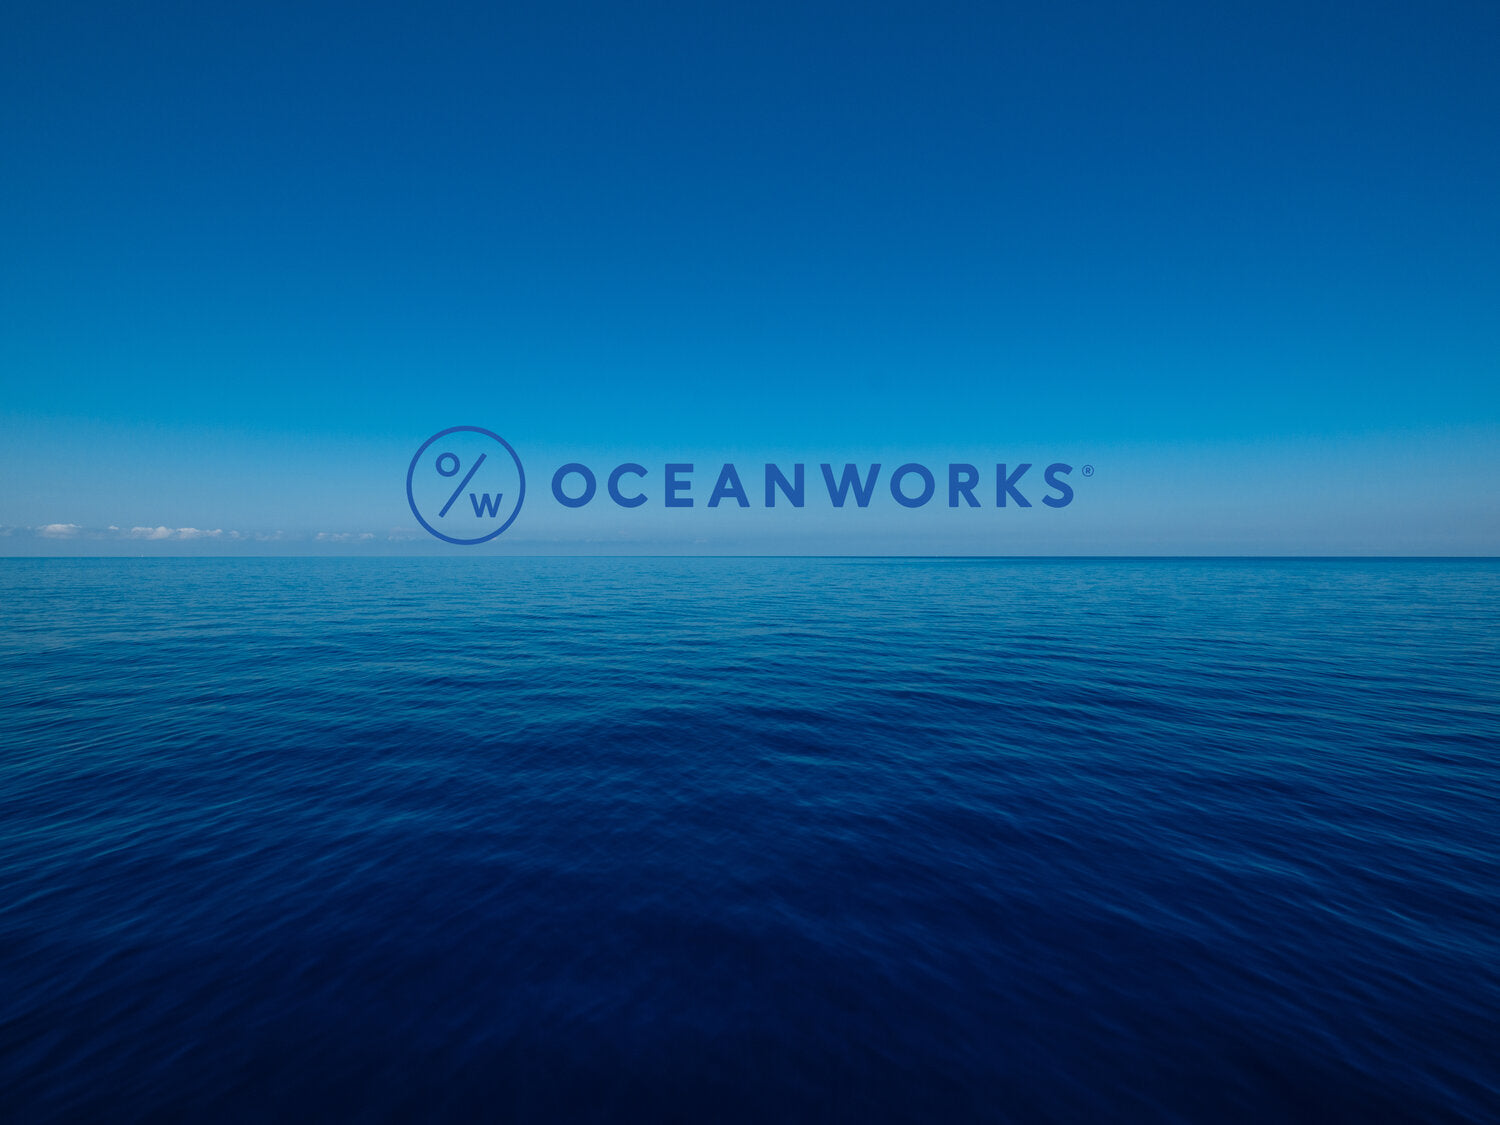 OSHEN and Oceanworks. OSHEN makeup cases are made with Oceanworks recycled ocean plastic.